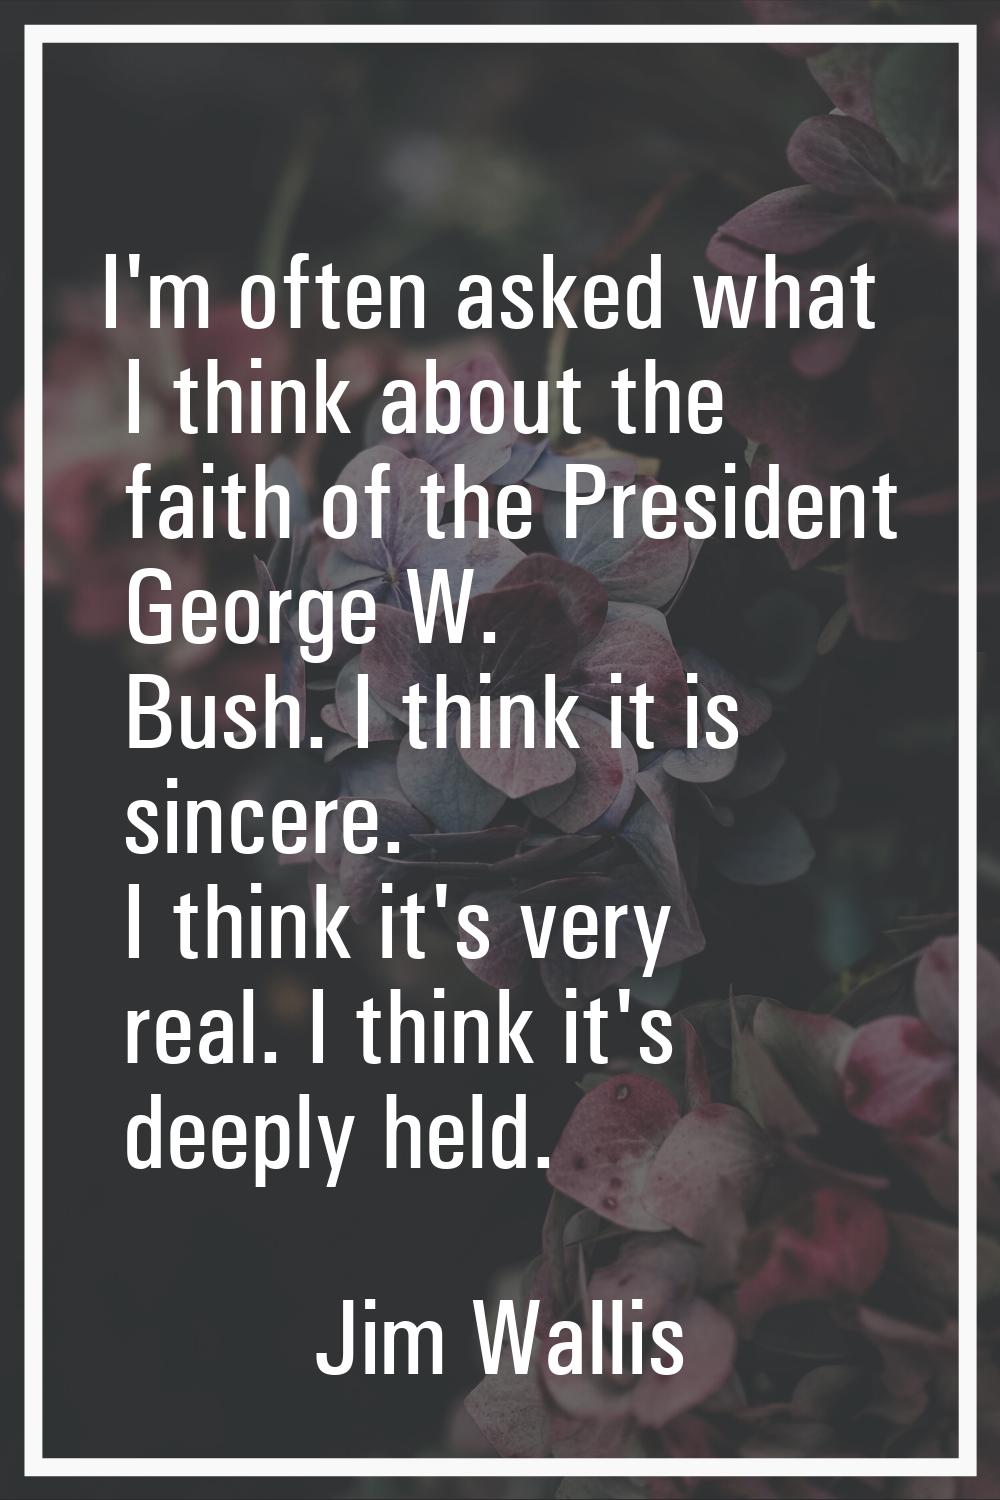 I'm often asked what I think about the faith of the President George W. Bush. I think it is sincere